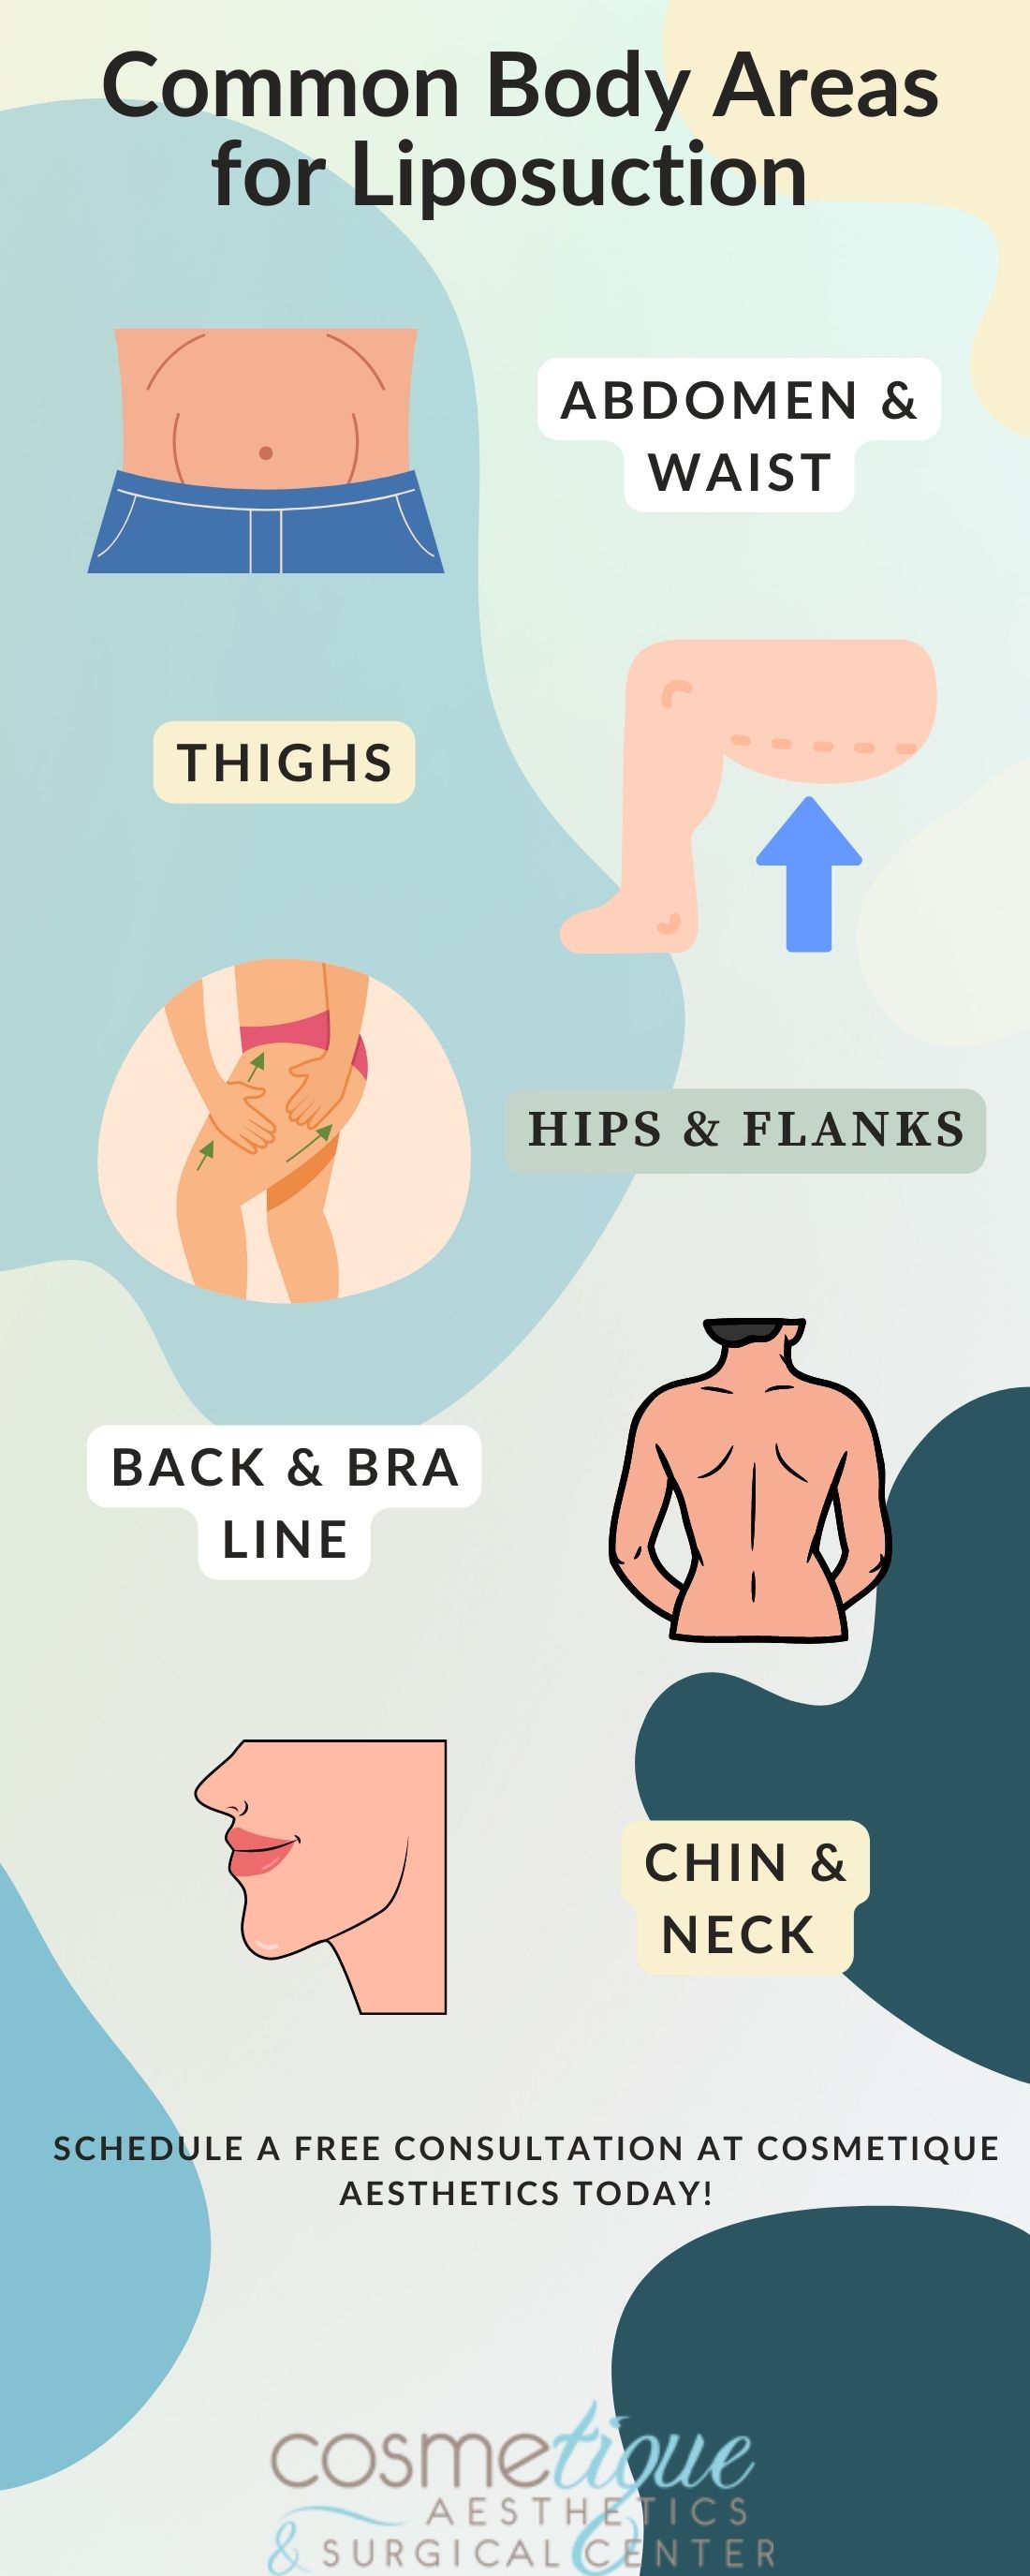 m35972 infographic common body areas for liposuction copy